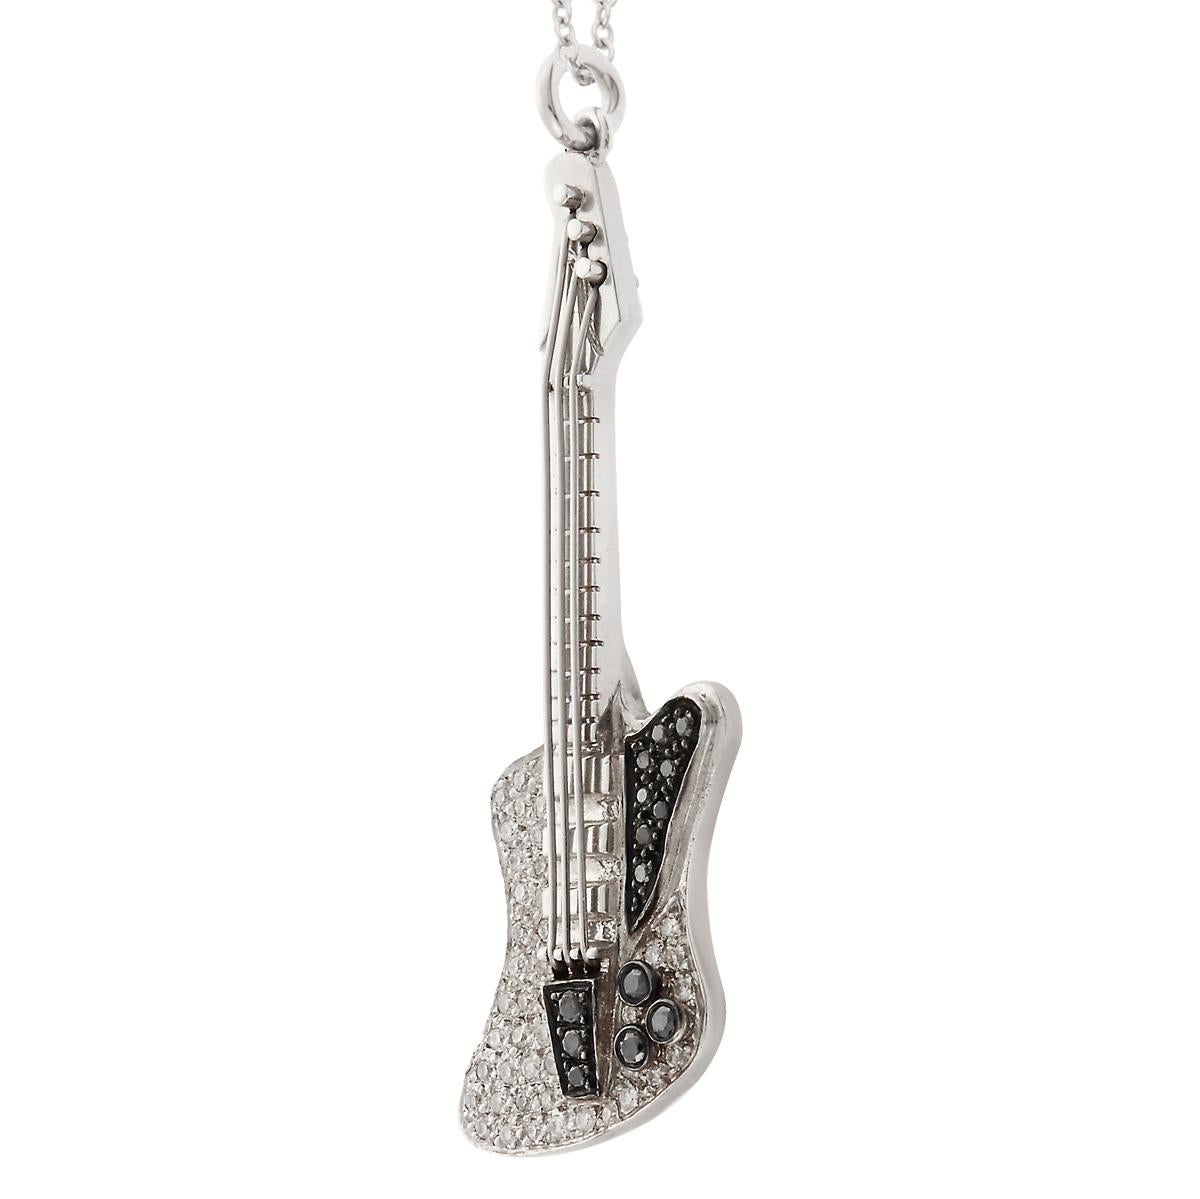 18k white gold Electric Guitar Pendant pavé set with White and Black diamonds hanging on a thin 18k white gold chain 50cm in total length. 25cm drop (approximately). 